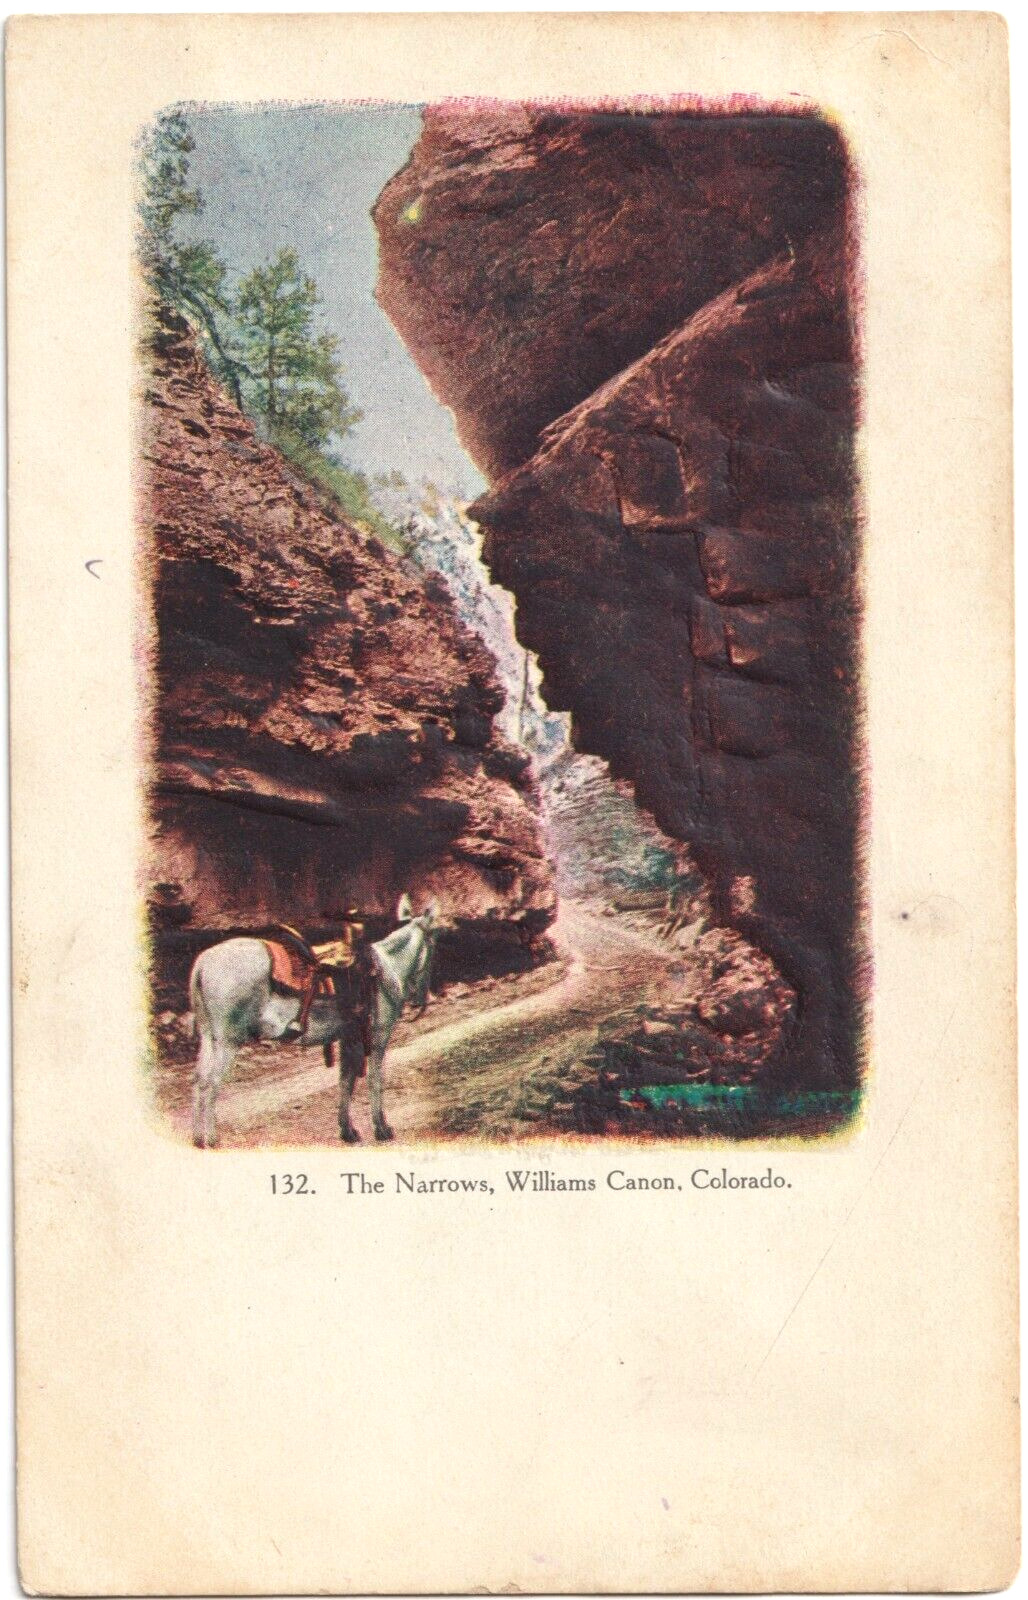 The Narrows-Williams Canon (Canyon), Colorado CO-c.1900s embossed antique